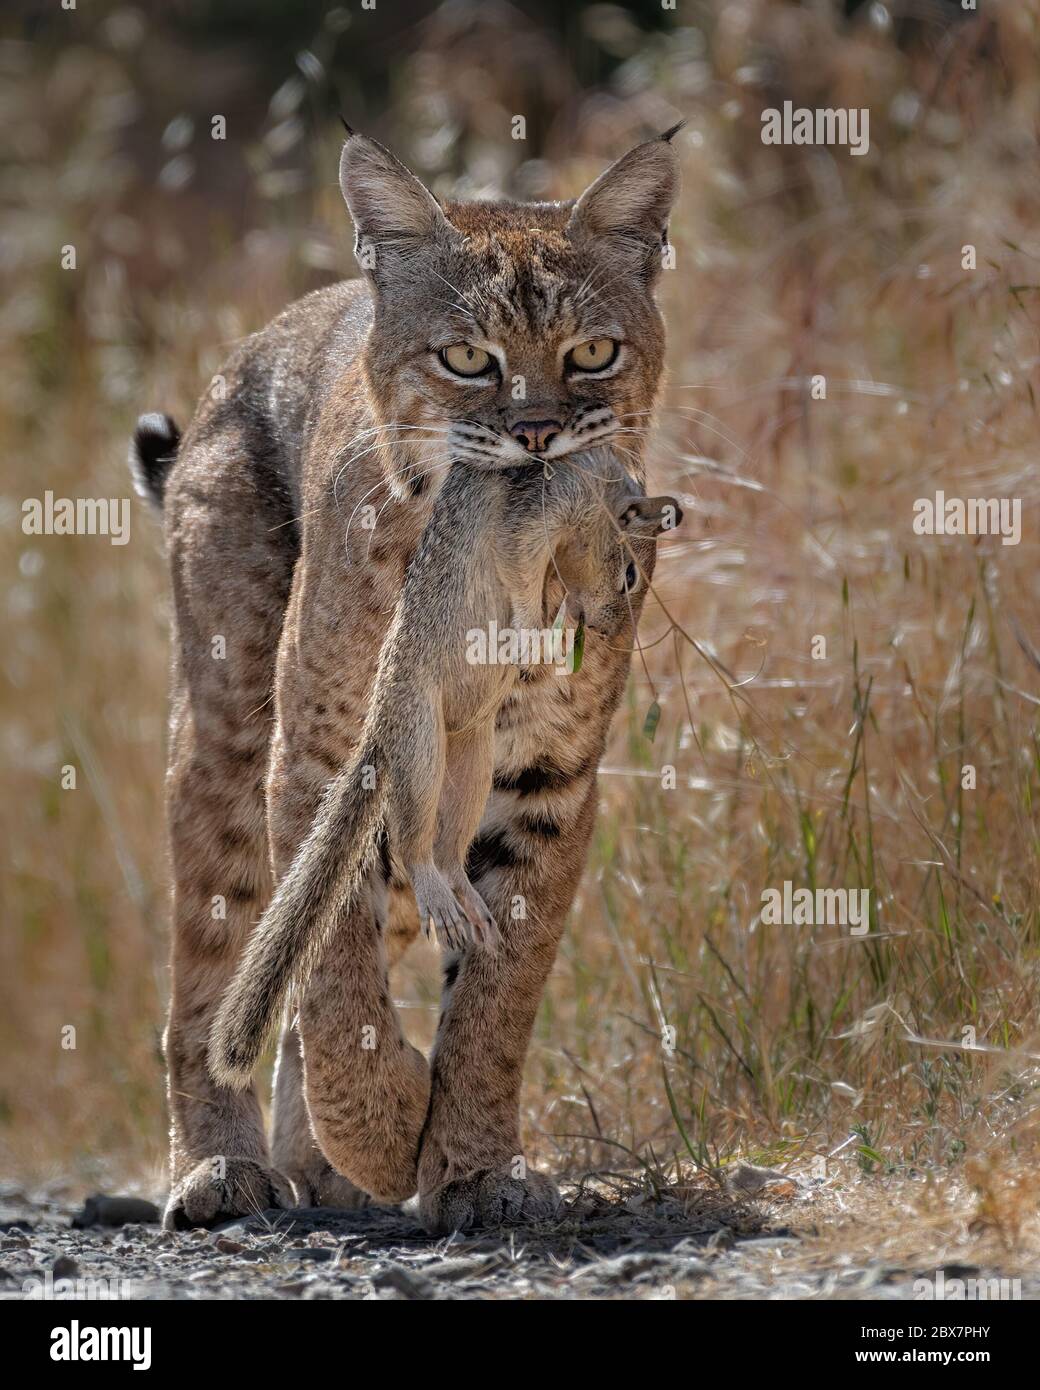 A Bobcat delivers the killing bite to a California Ground Squirrel before carrying the prey to her kittens. Stock Photo